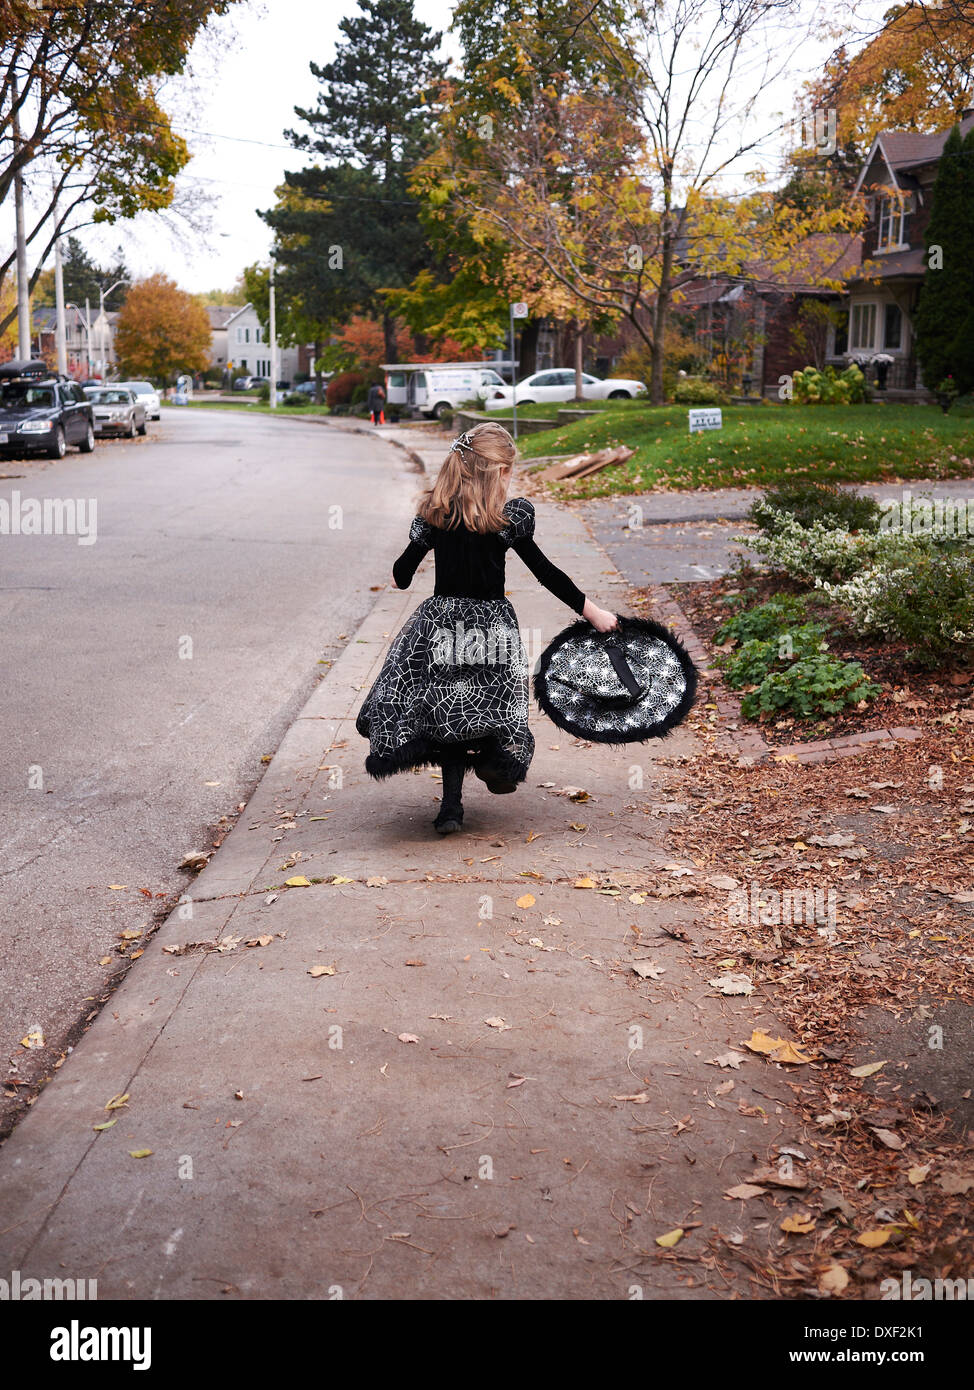 Girl Trick or Treating in Witch Costume, Toronto, Ontario, Canada Stock Photo